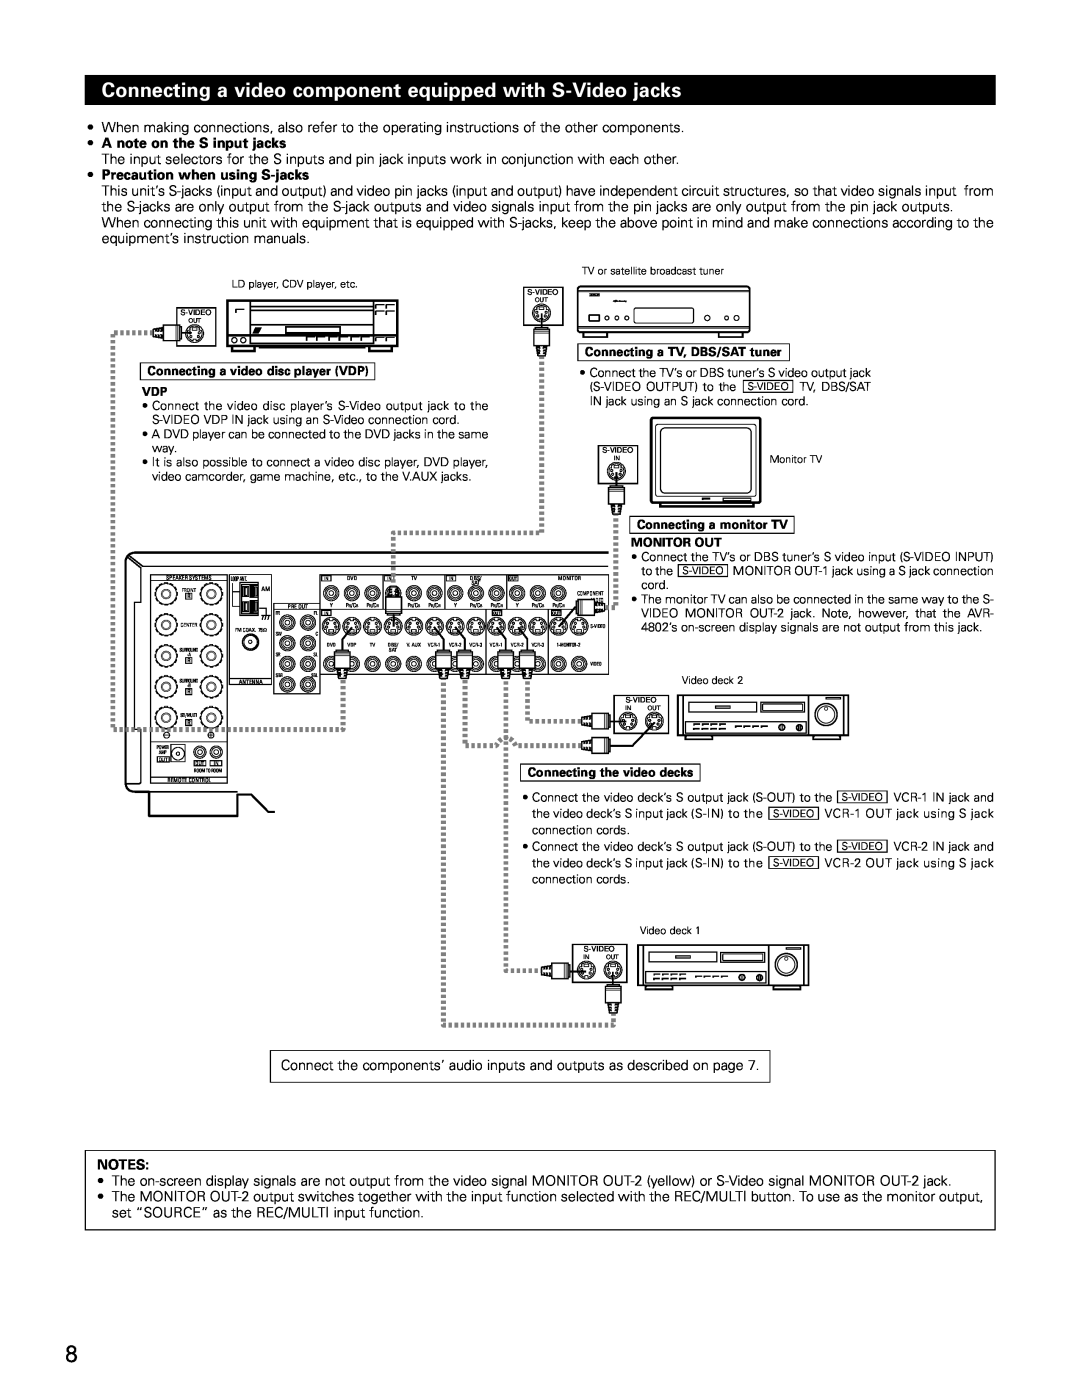 Denon AVR-4802 manual •A note on the S input jacks, •Precaution when using S-jacks, Connecting a video disc player VDP VDP 